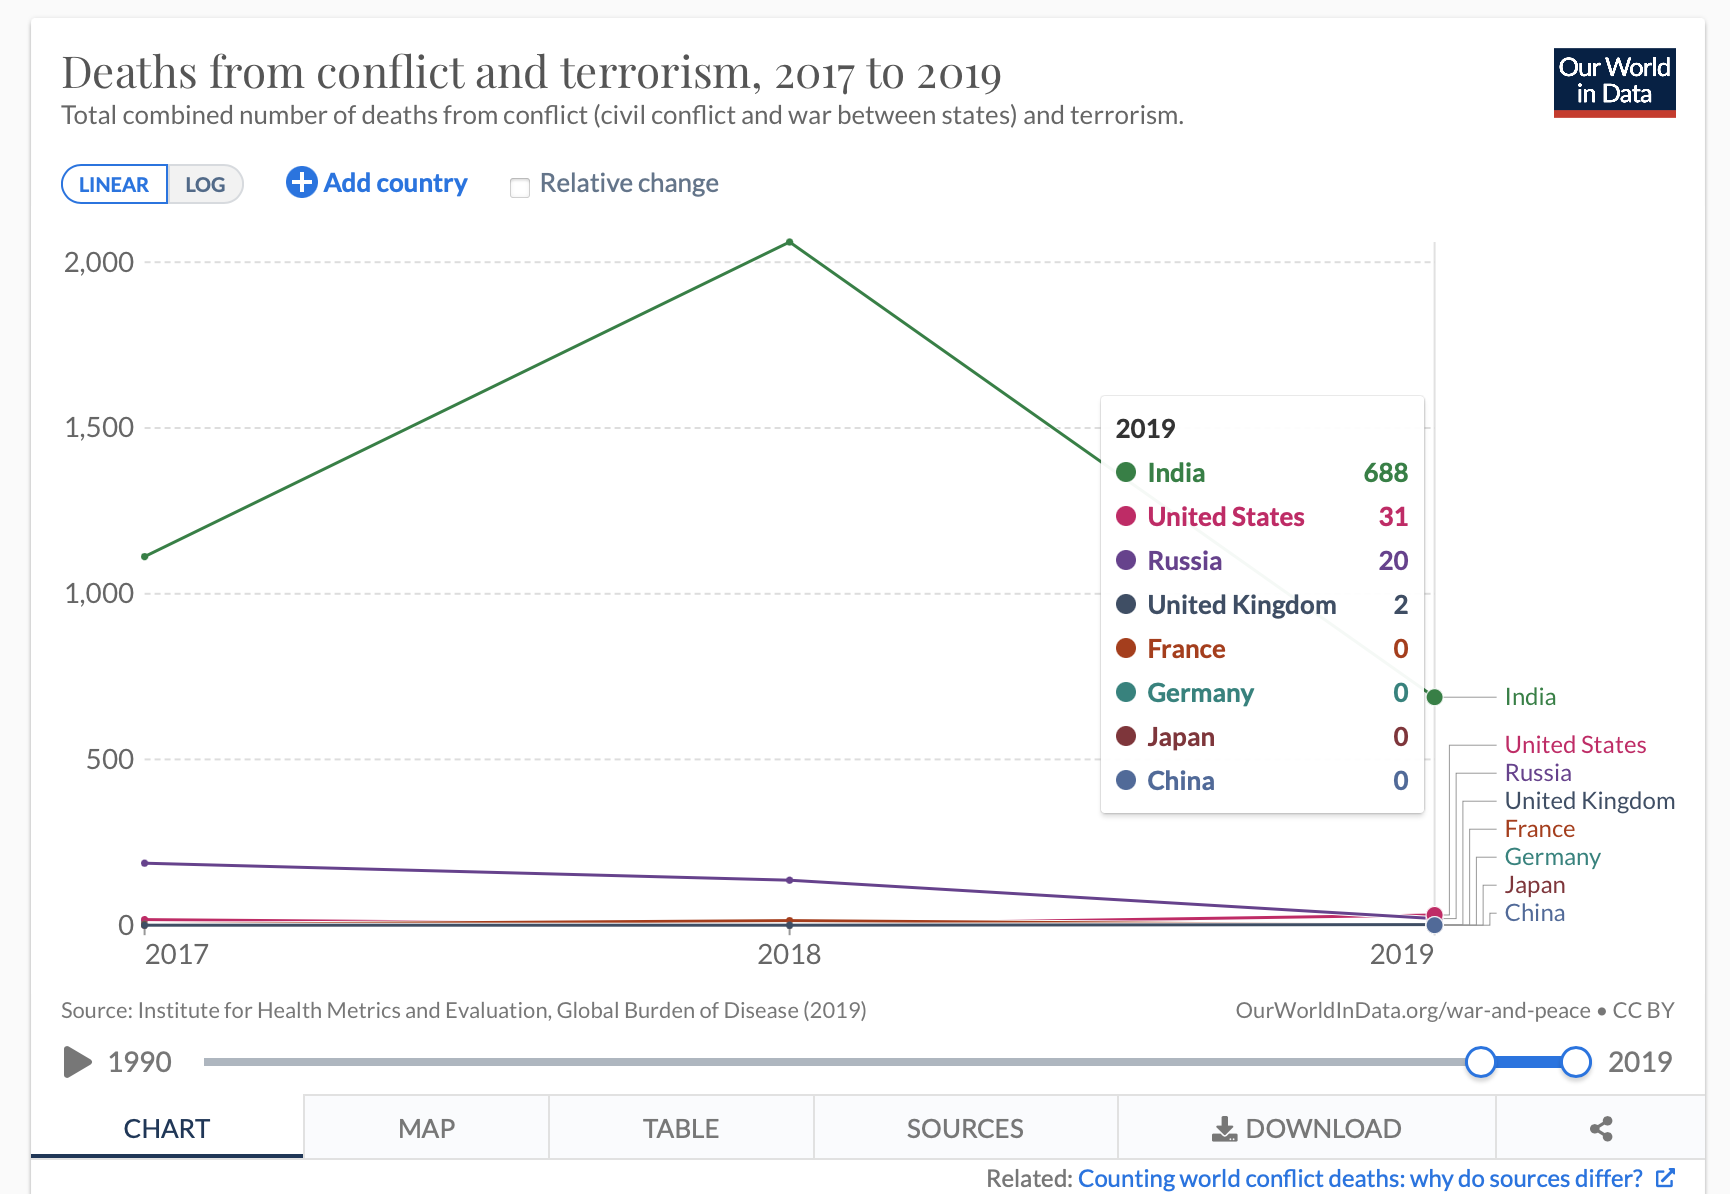 Regional conflict and terrorism deaths